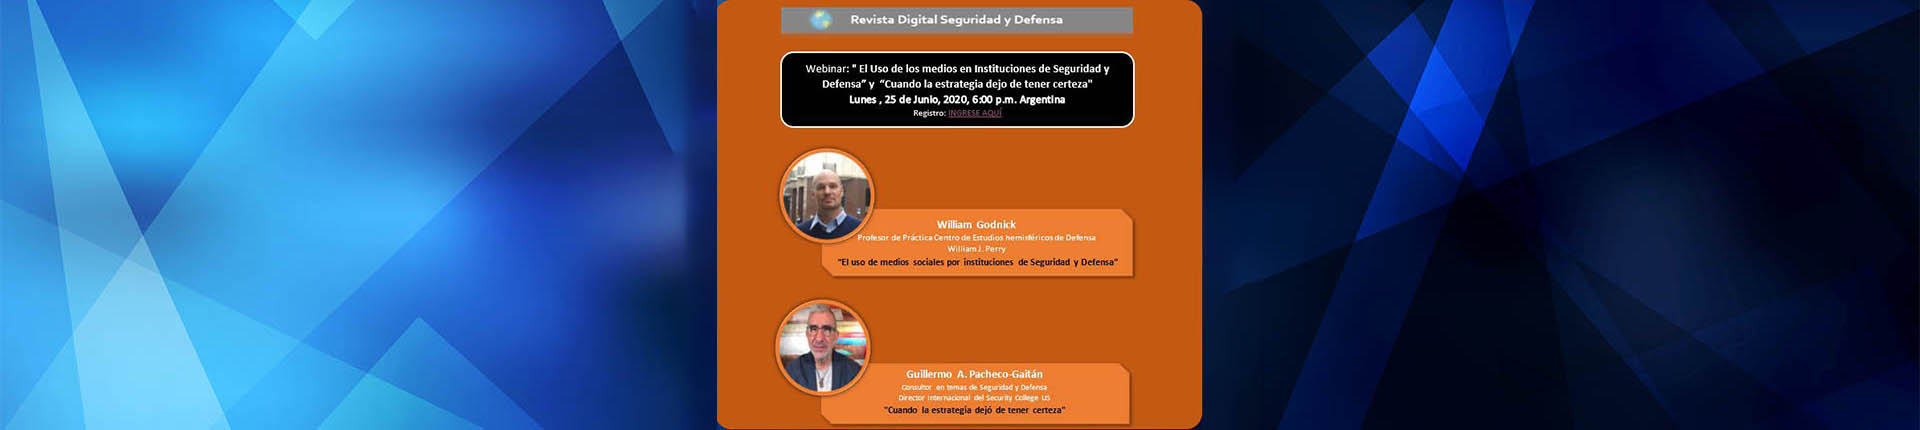 Social Media Use in the Defense Sector